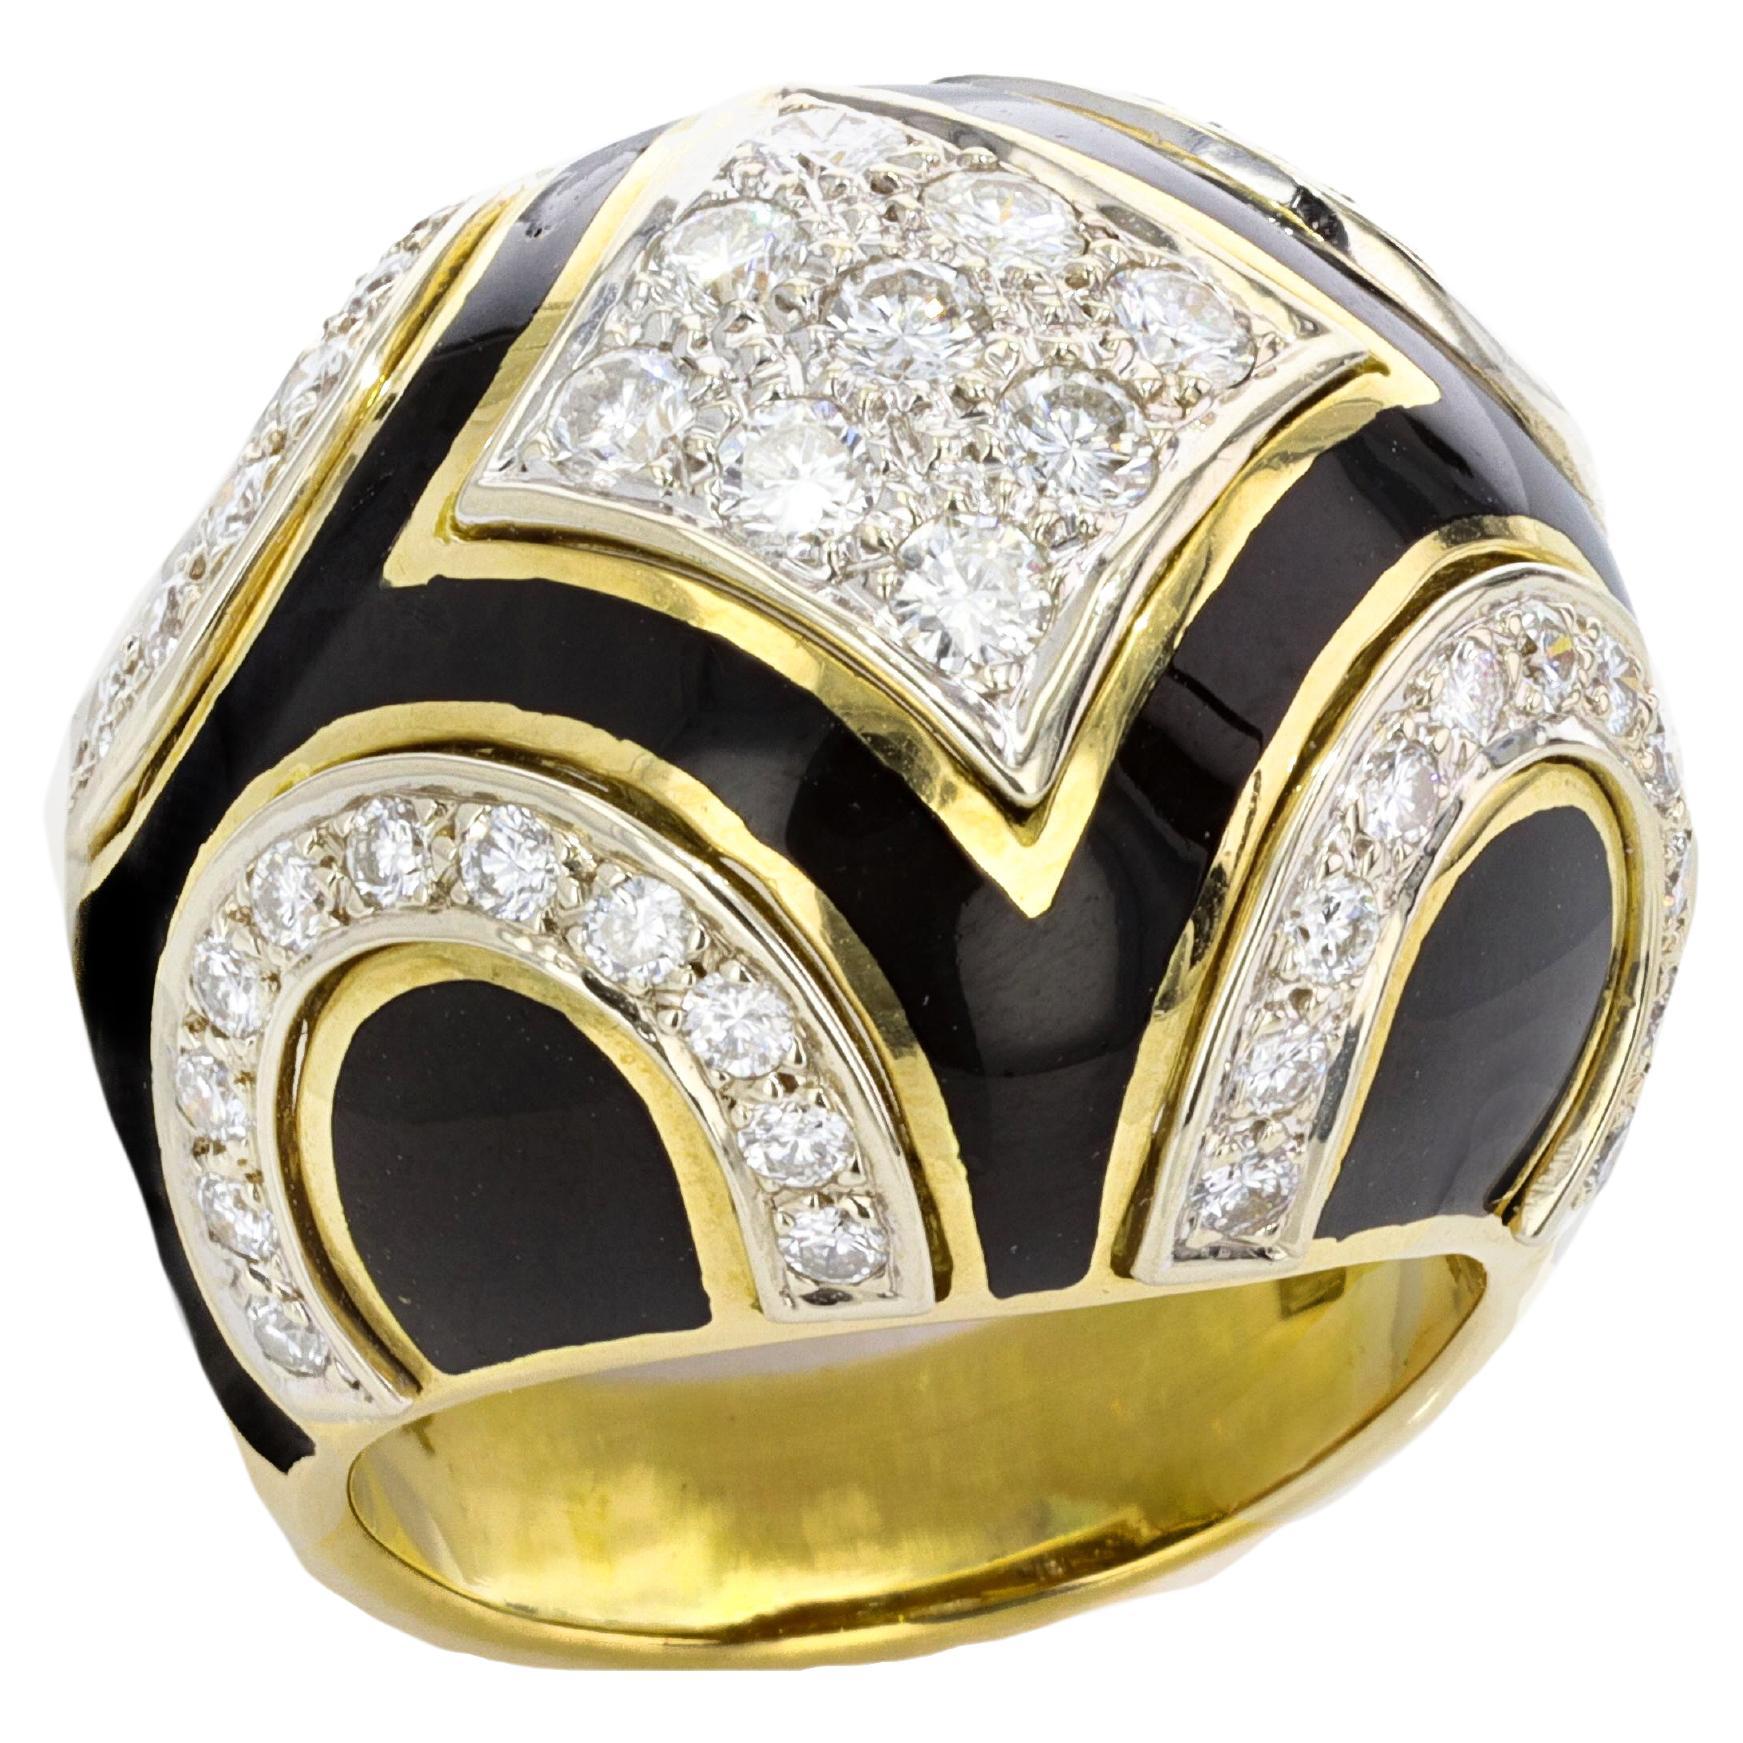 Ladies 18K yellow gold black onyx and diamond dome ring.  The ring contains approximately 1.55 ctw of diamonds. The ring is a size 6.